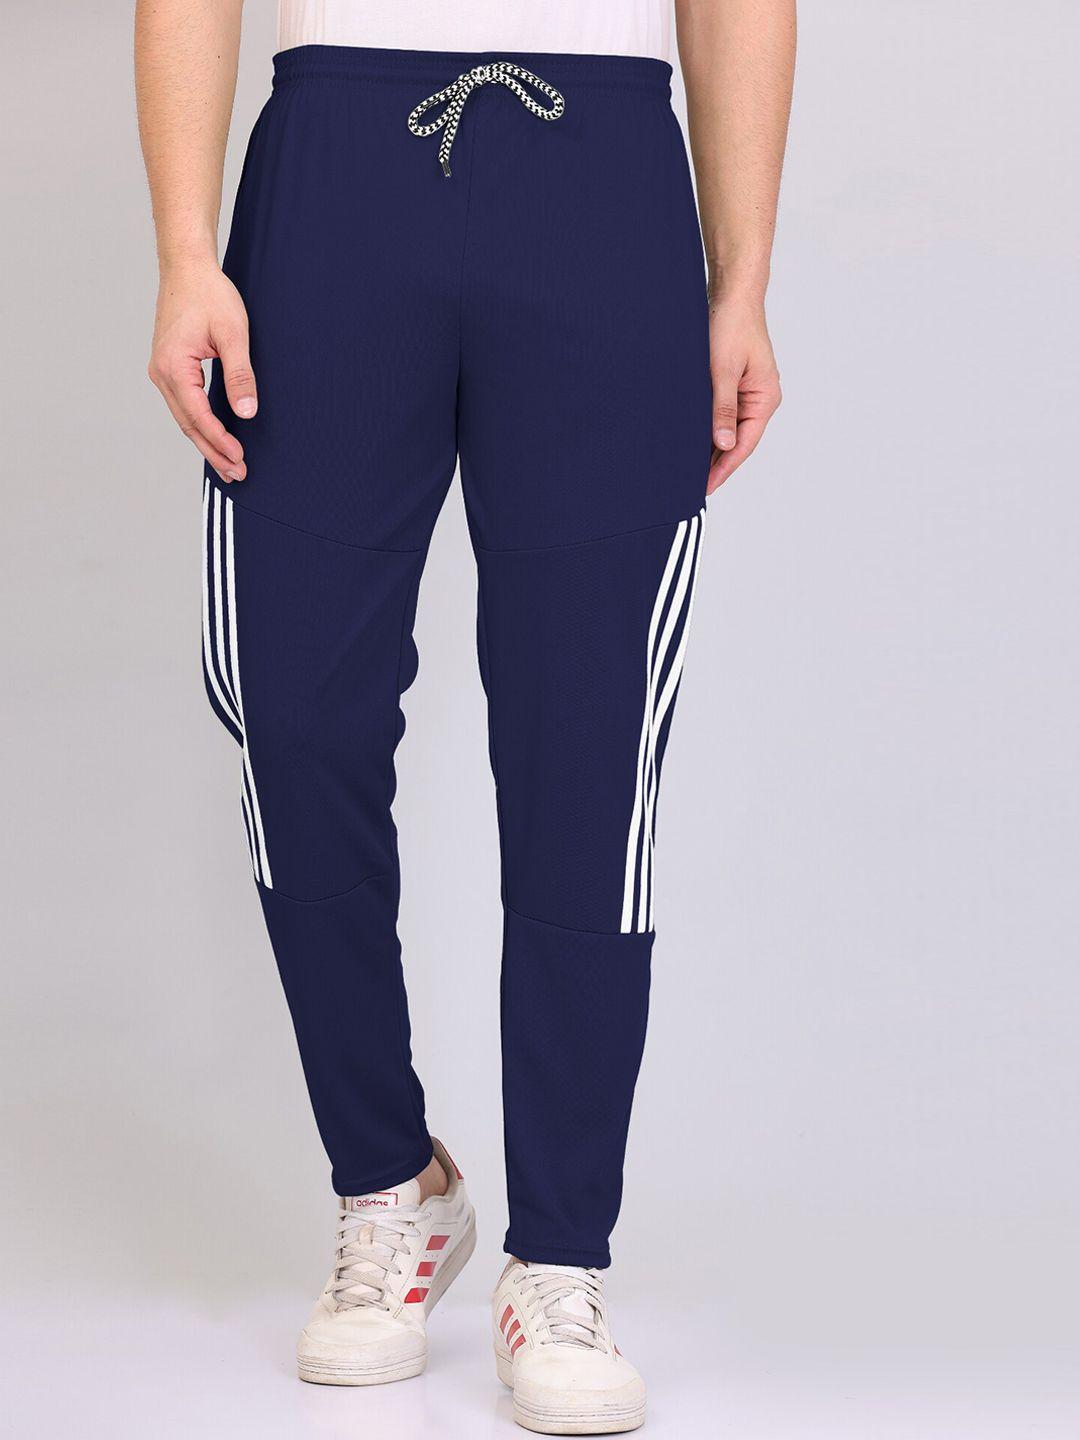 wuxi-men-straight-fit-track-pant